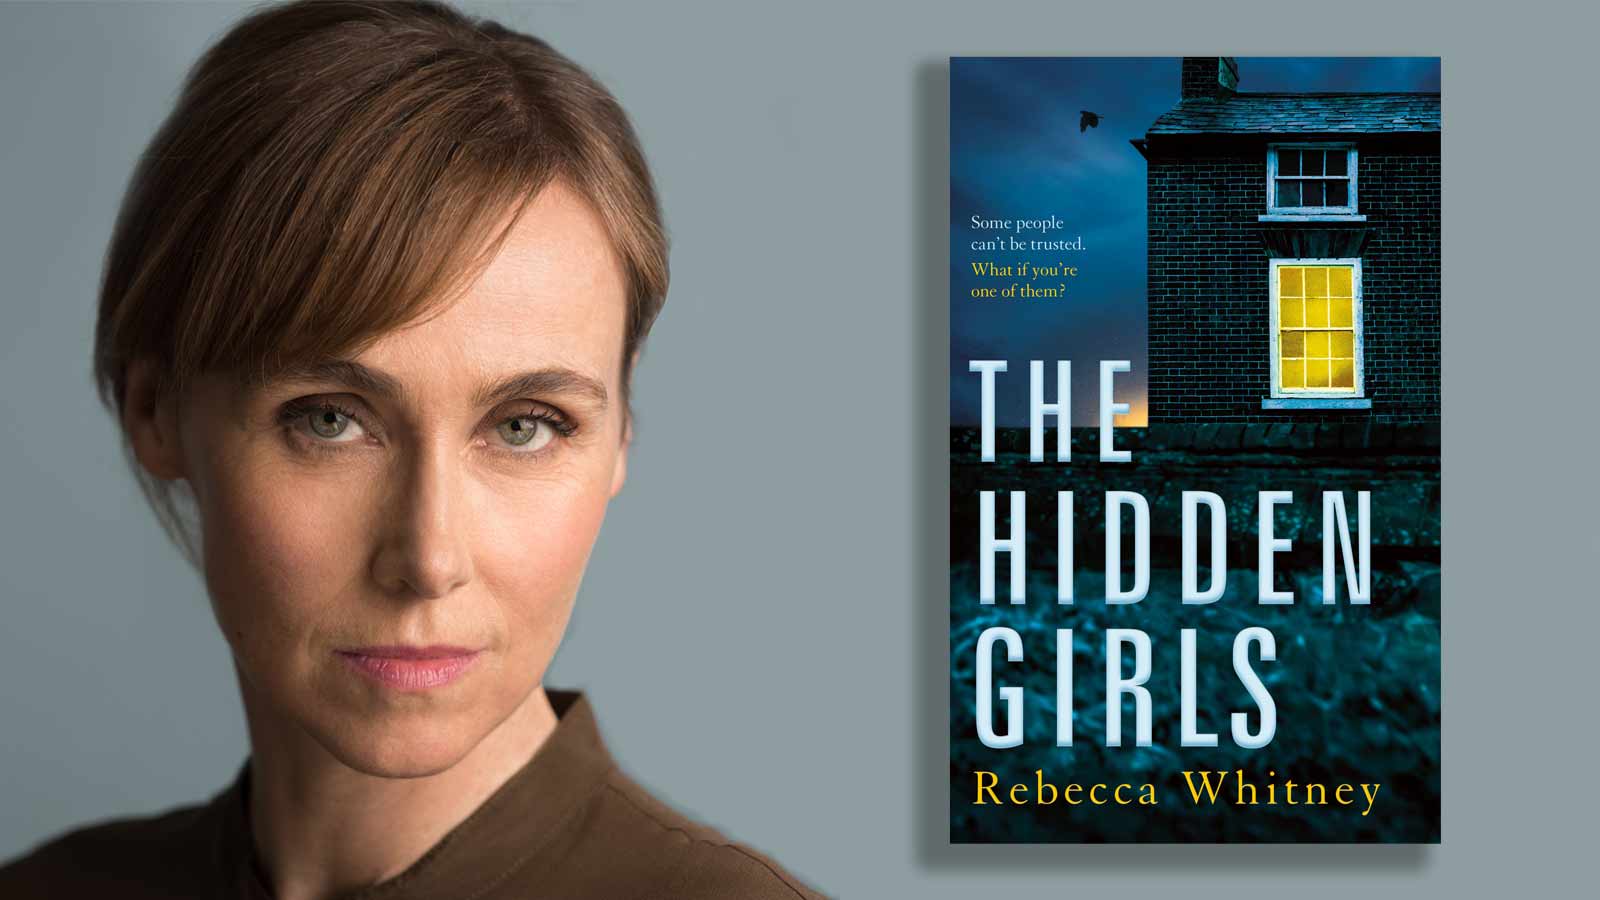 Rebecca Whitney and the cover of The Hidden Girls